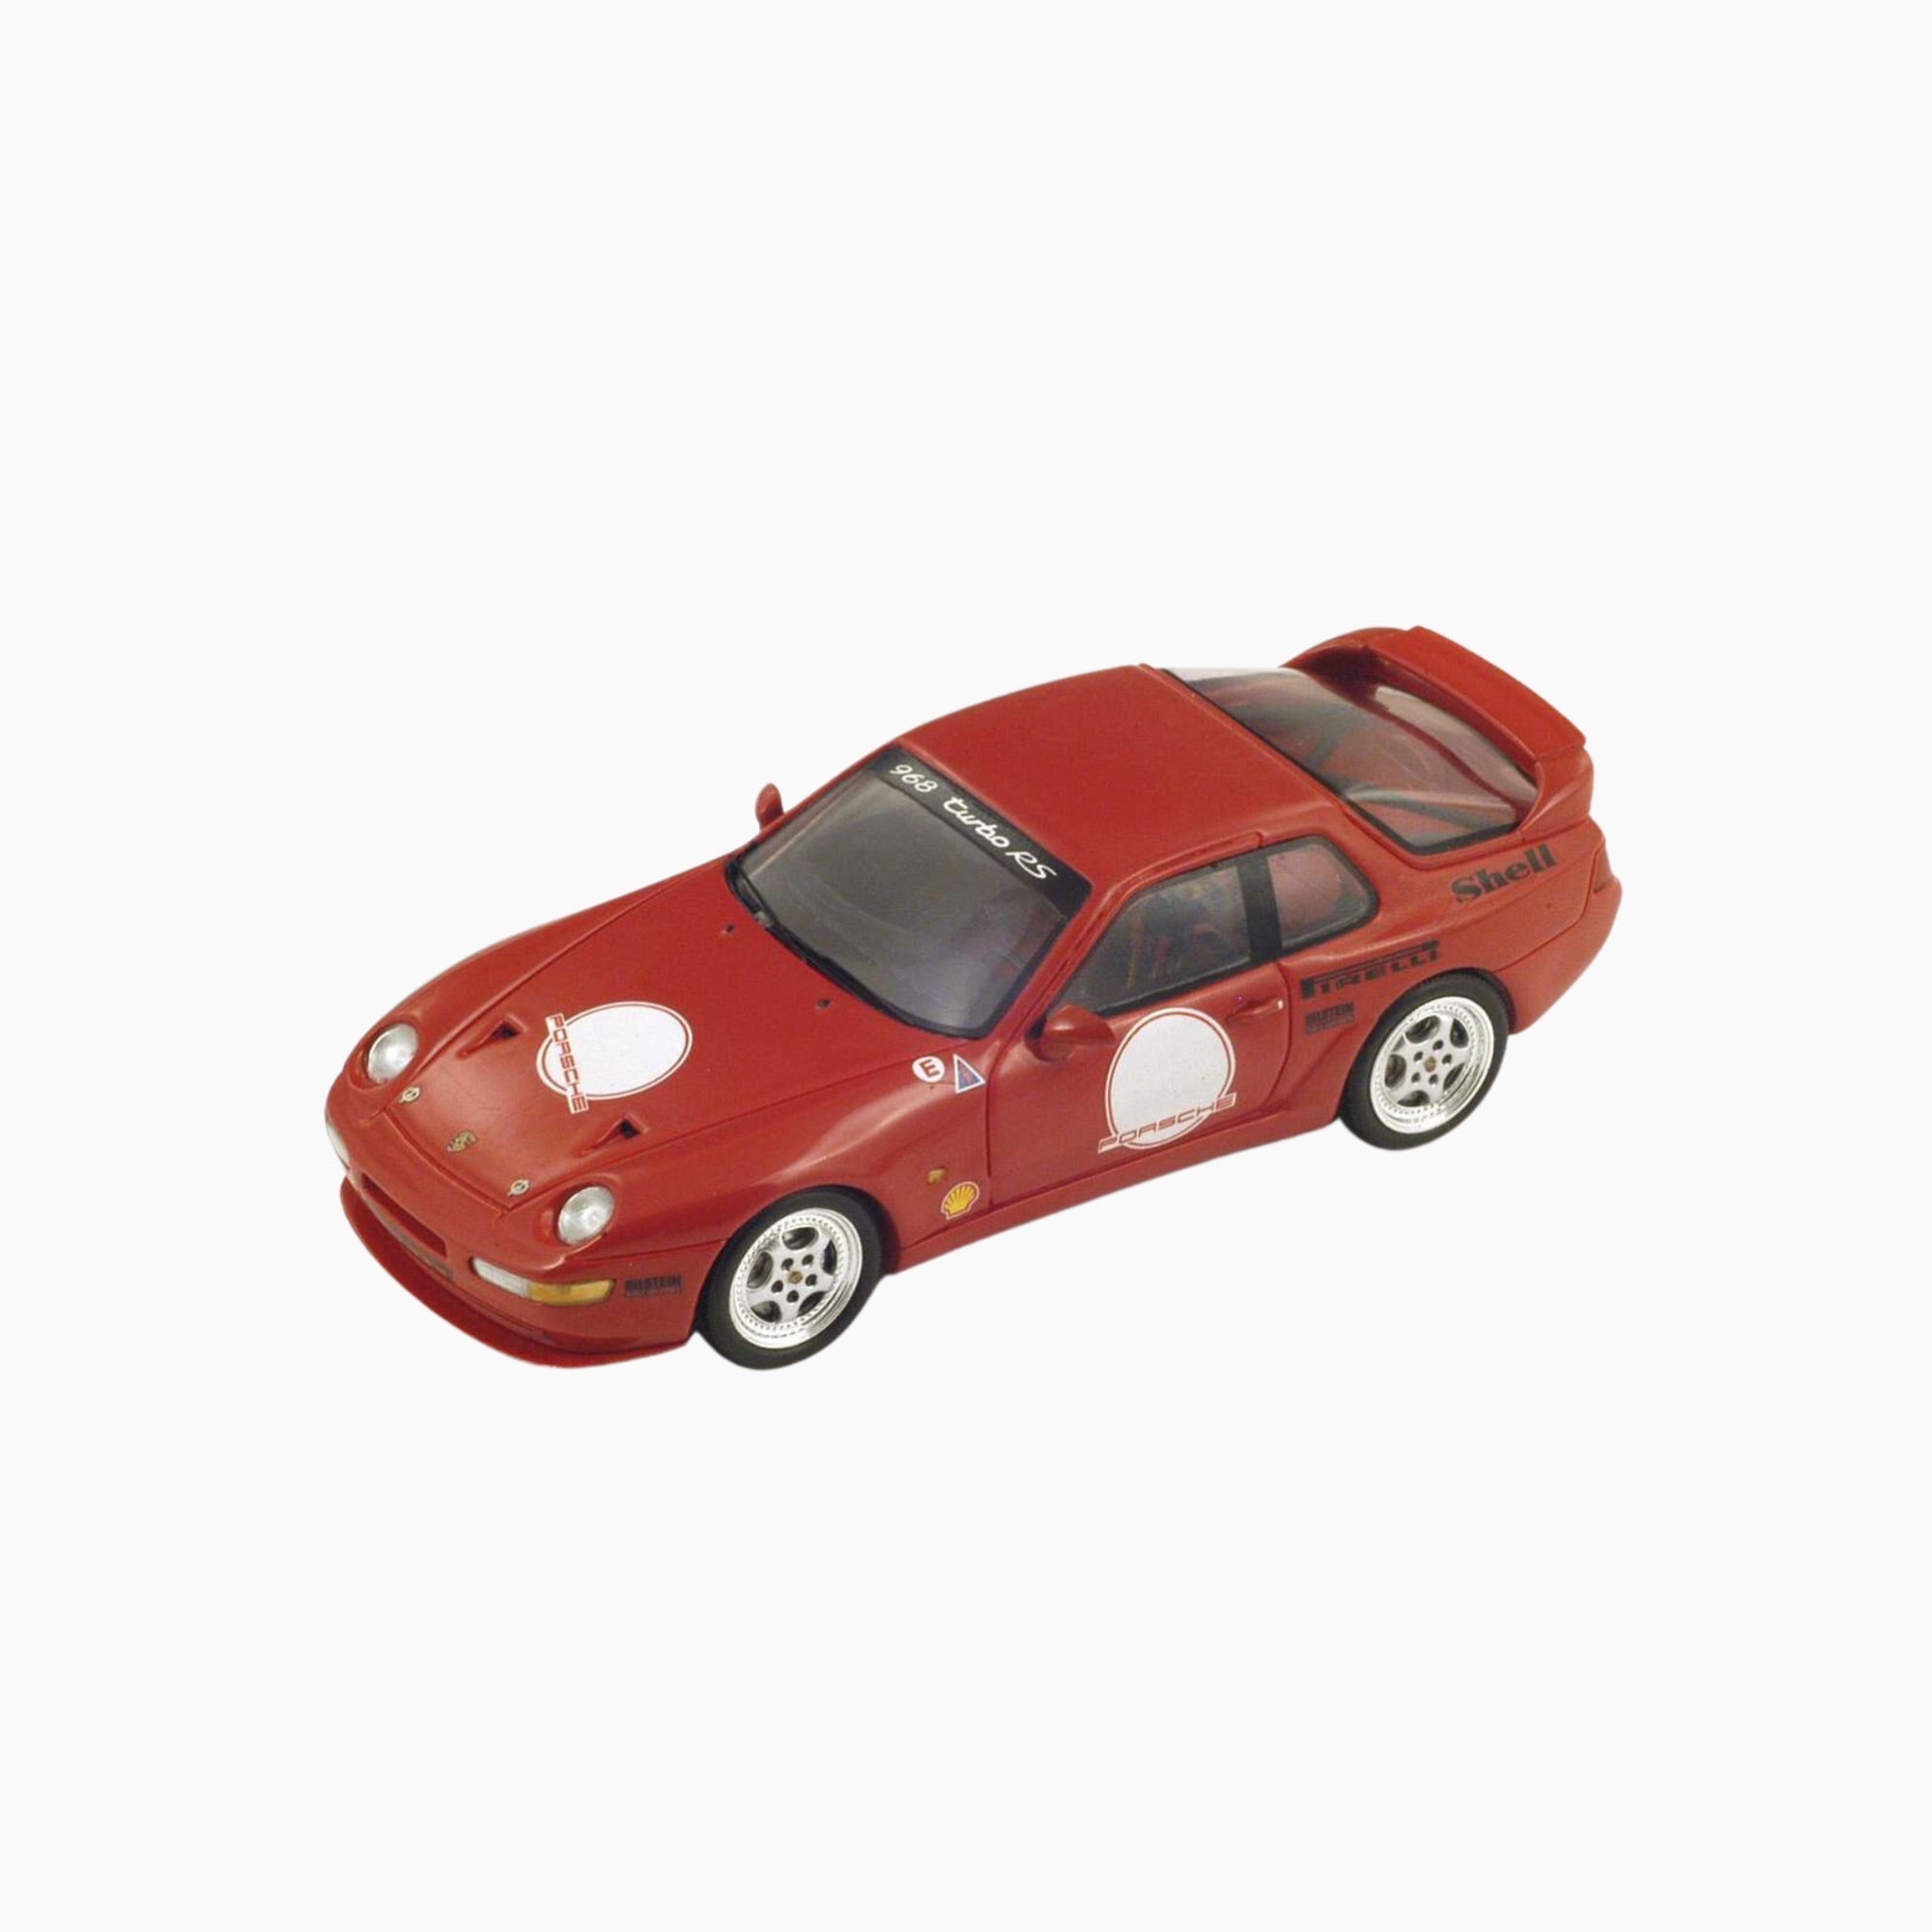 Porsche 968Turbo Rs 1993 | 1:43 Scale Model-1:43 Scale Model-Spark Models-gpx-store